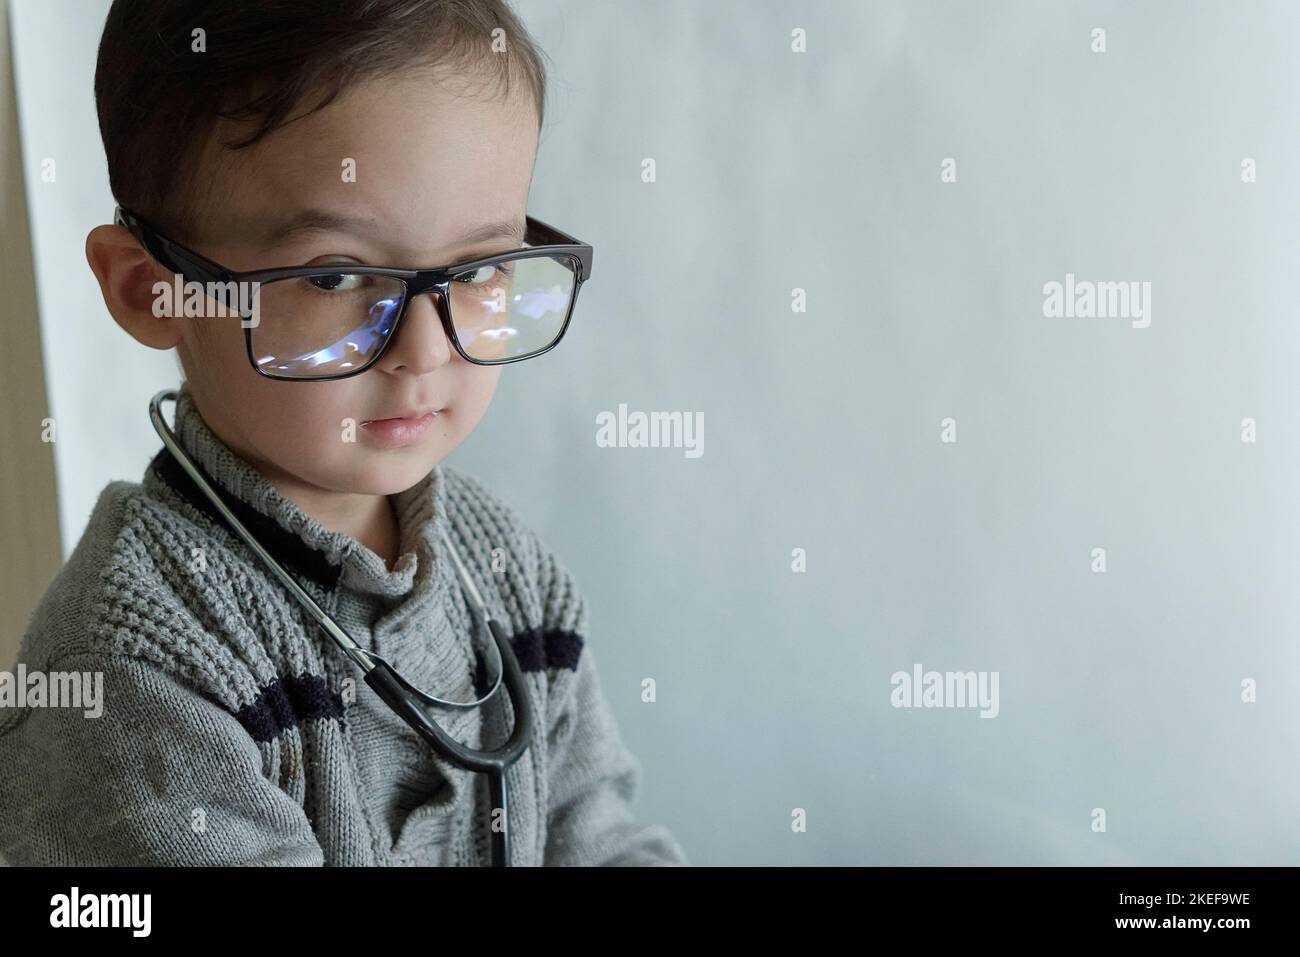 a little boy with glasses and a stel on his head, looking at the camera while he is wearing a stel Stock Photo